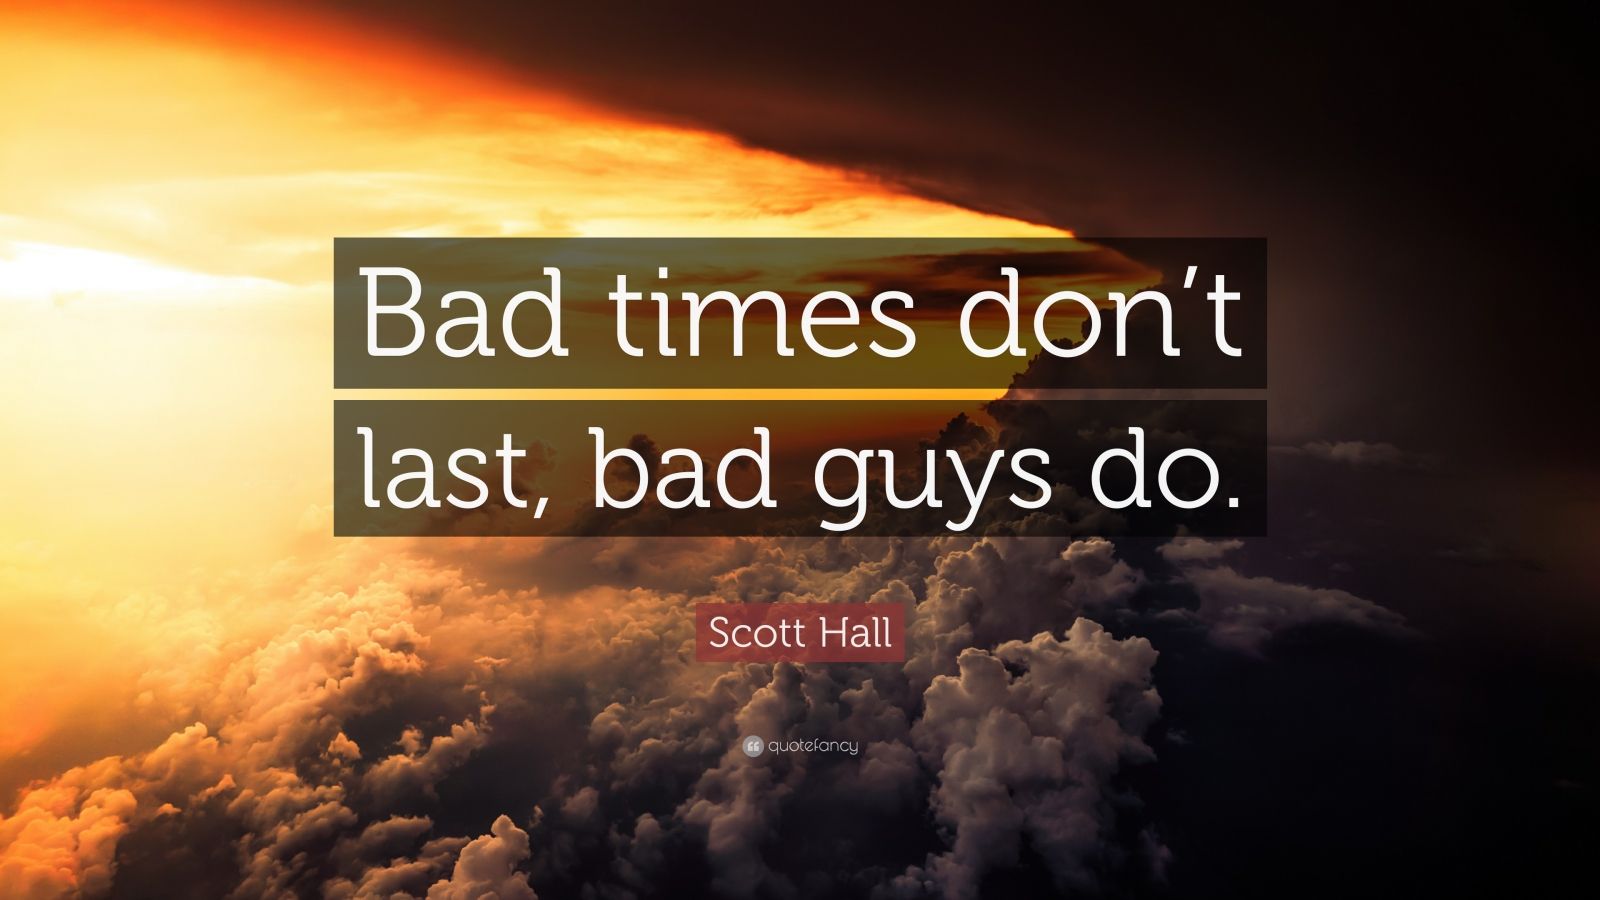 2186683 Scott Hall Quote Bad times don t last bad guys do